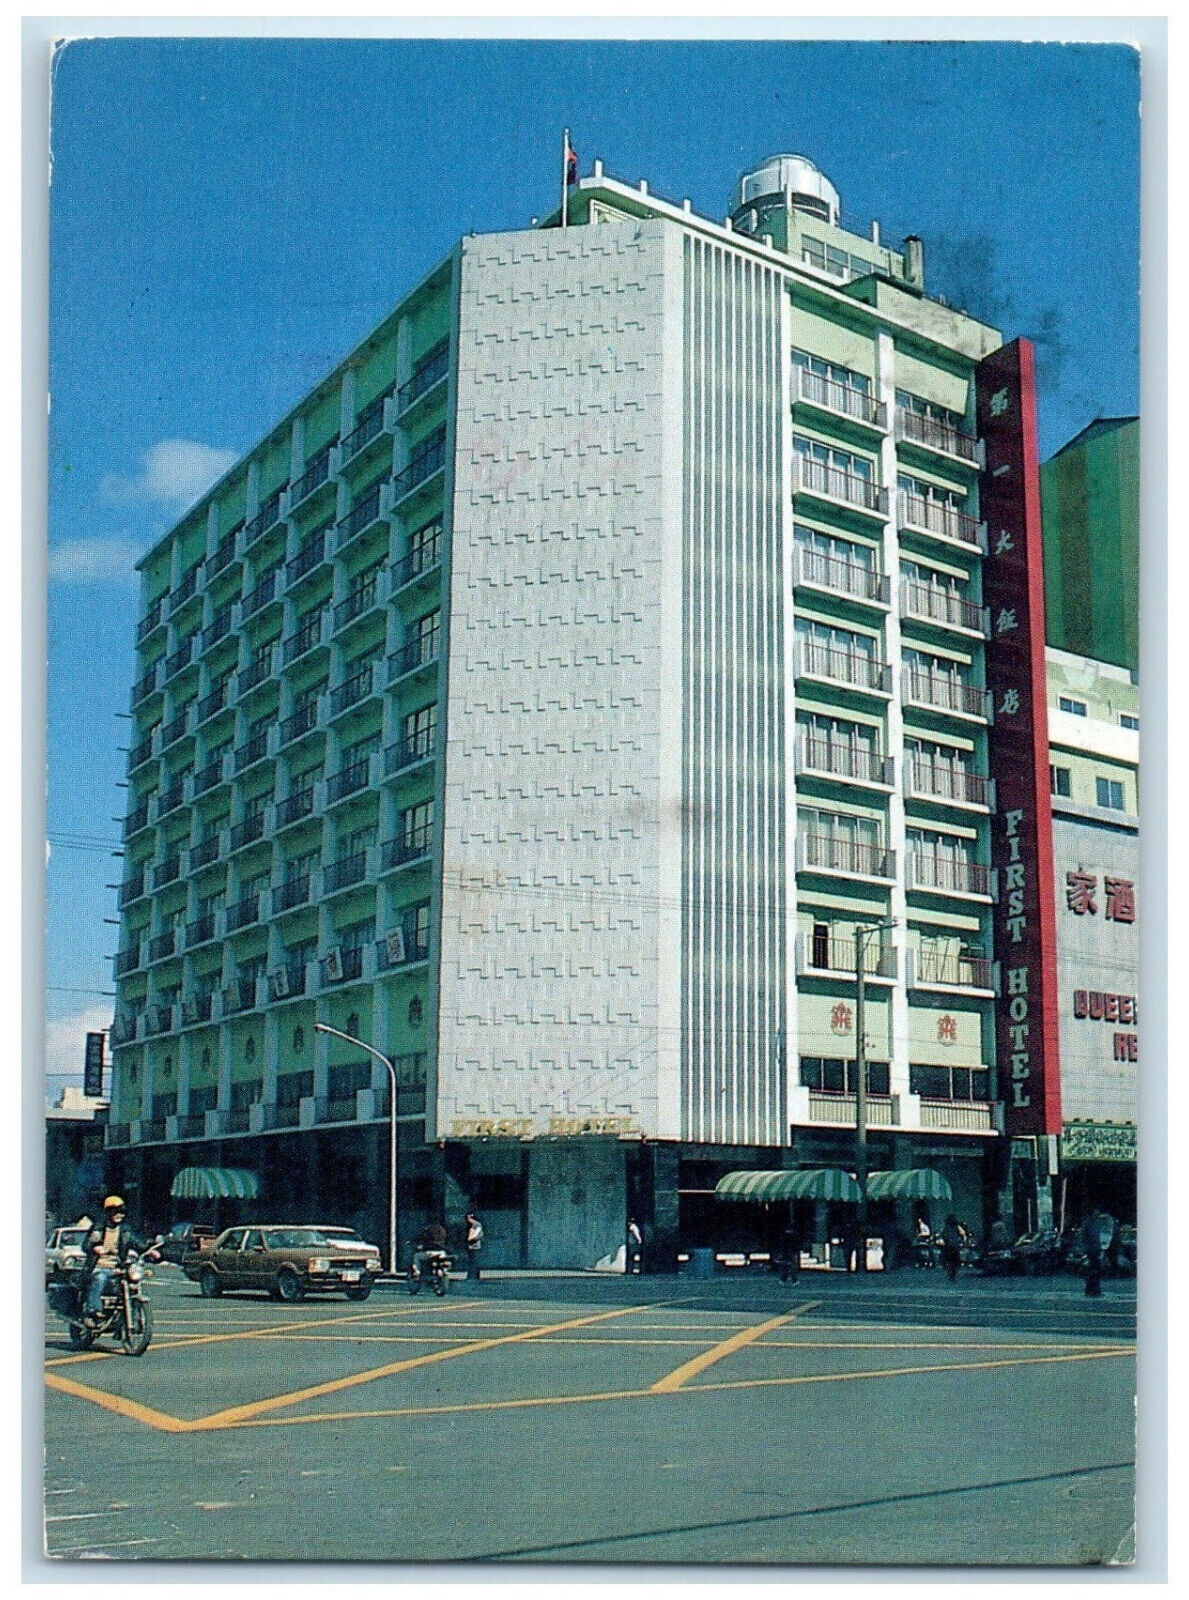 1988 First Hotel Taipei Taiwan Republic of China Posted Vintage Postcard